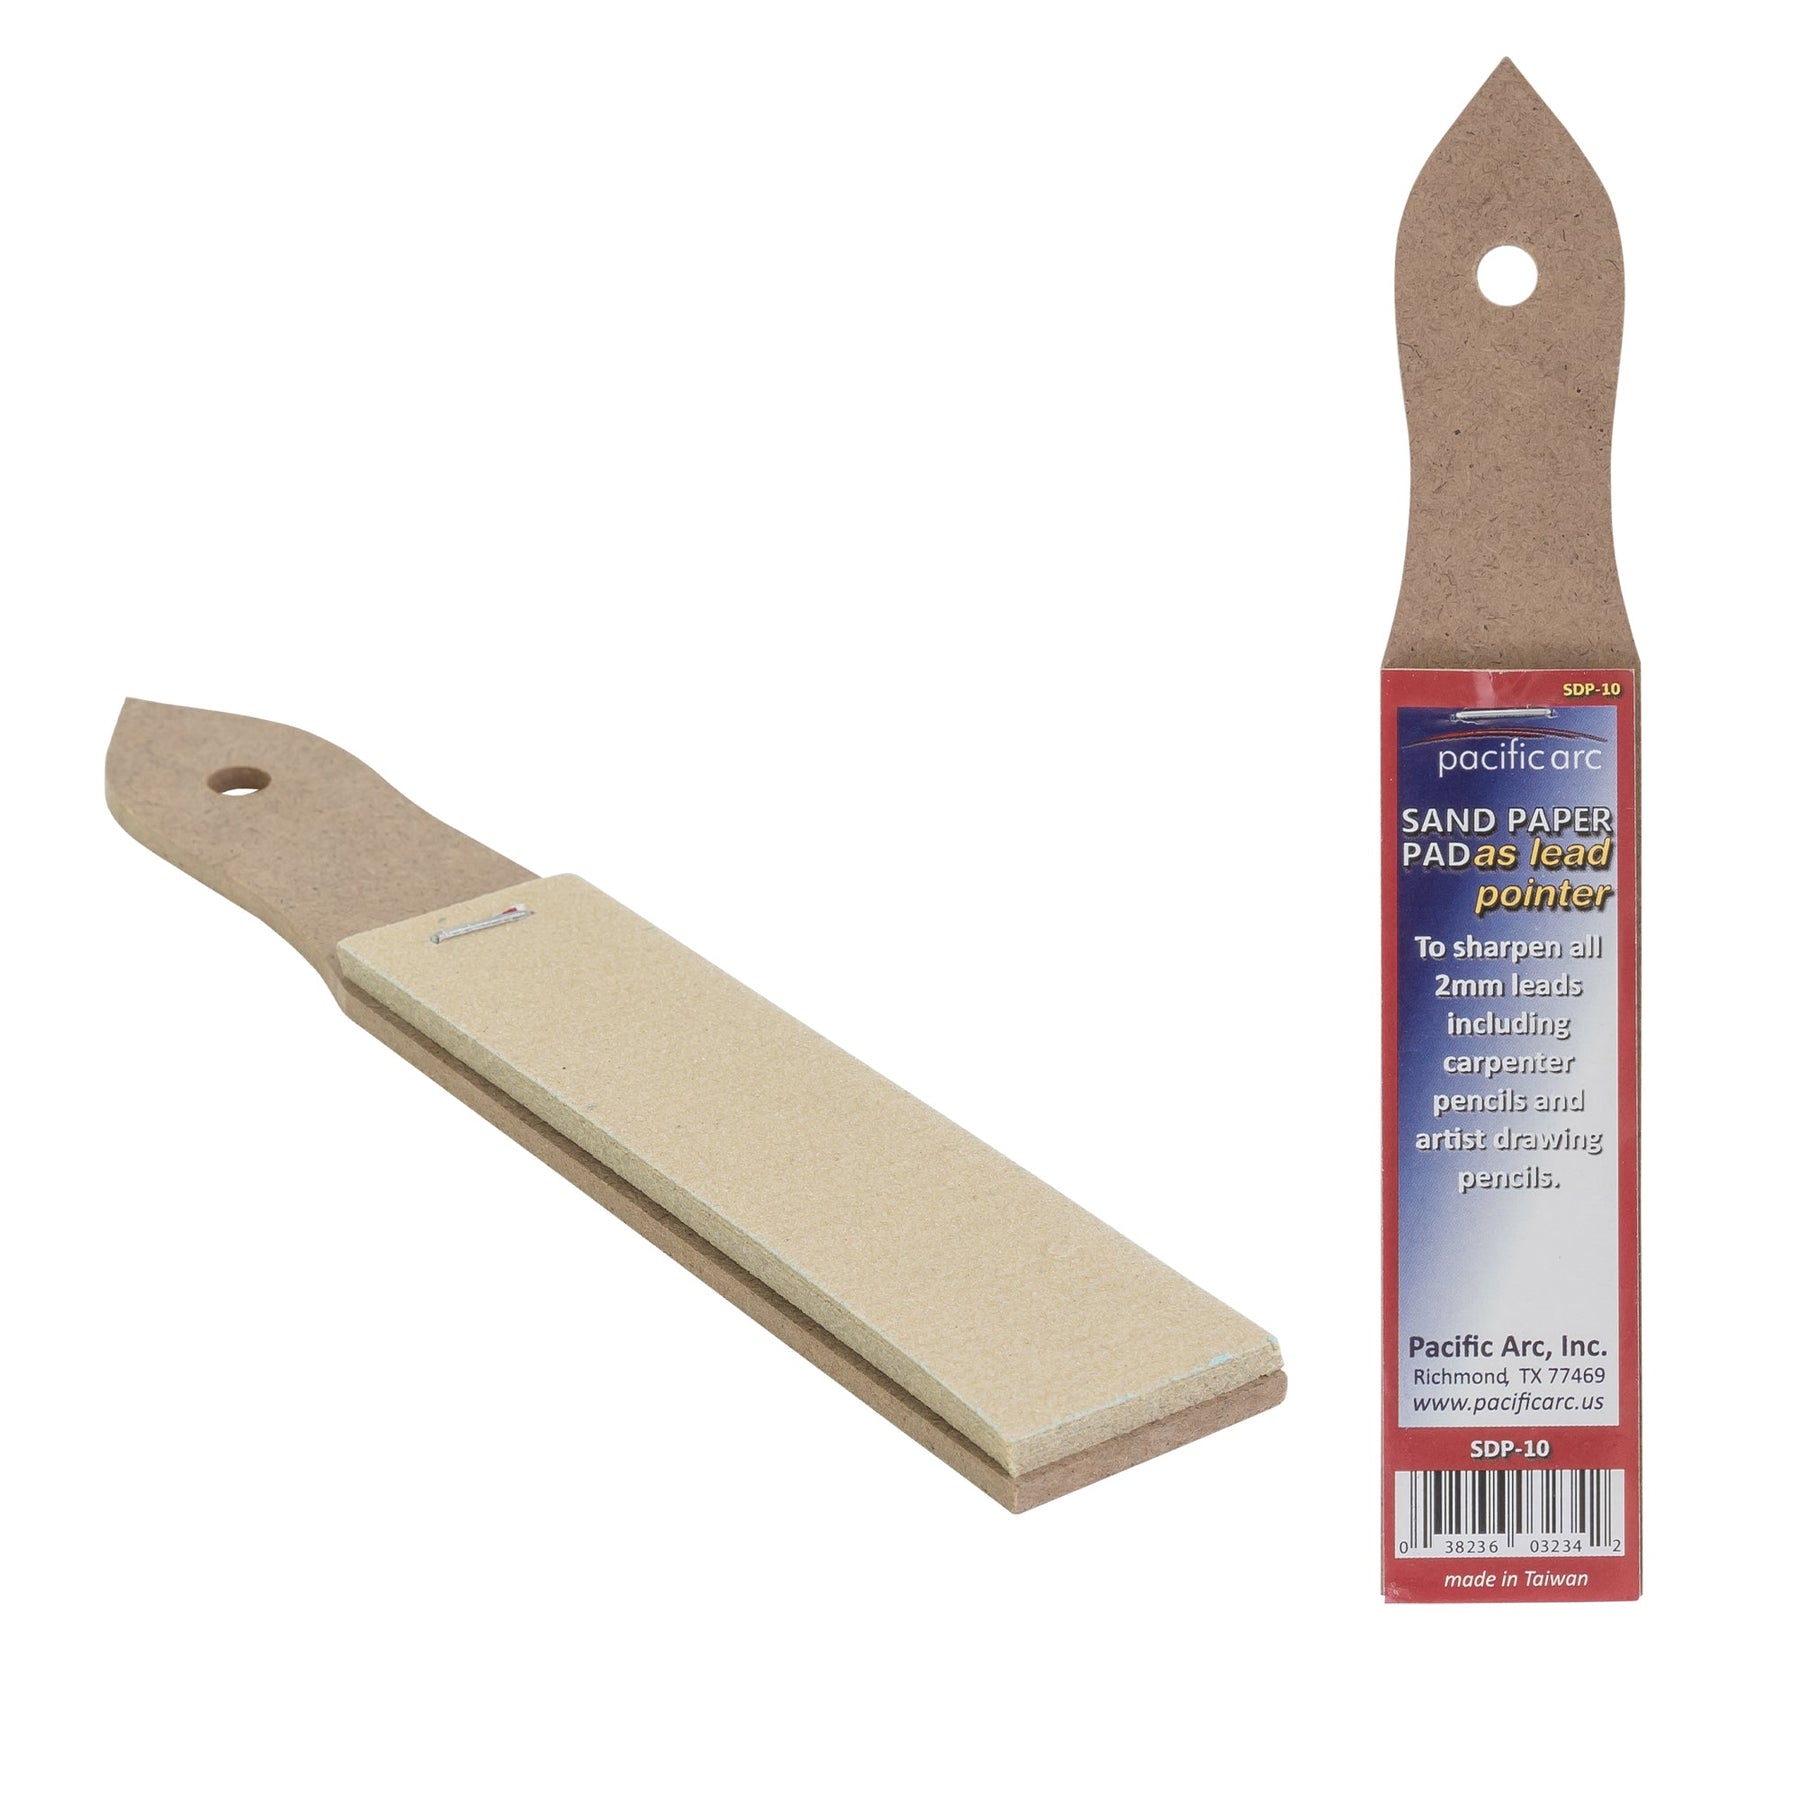 Pacific Arc, Lead Pointer: sandpaper pad, 12 sheets/pad